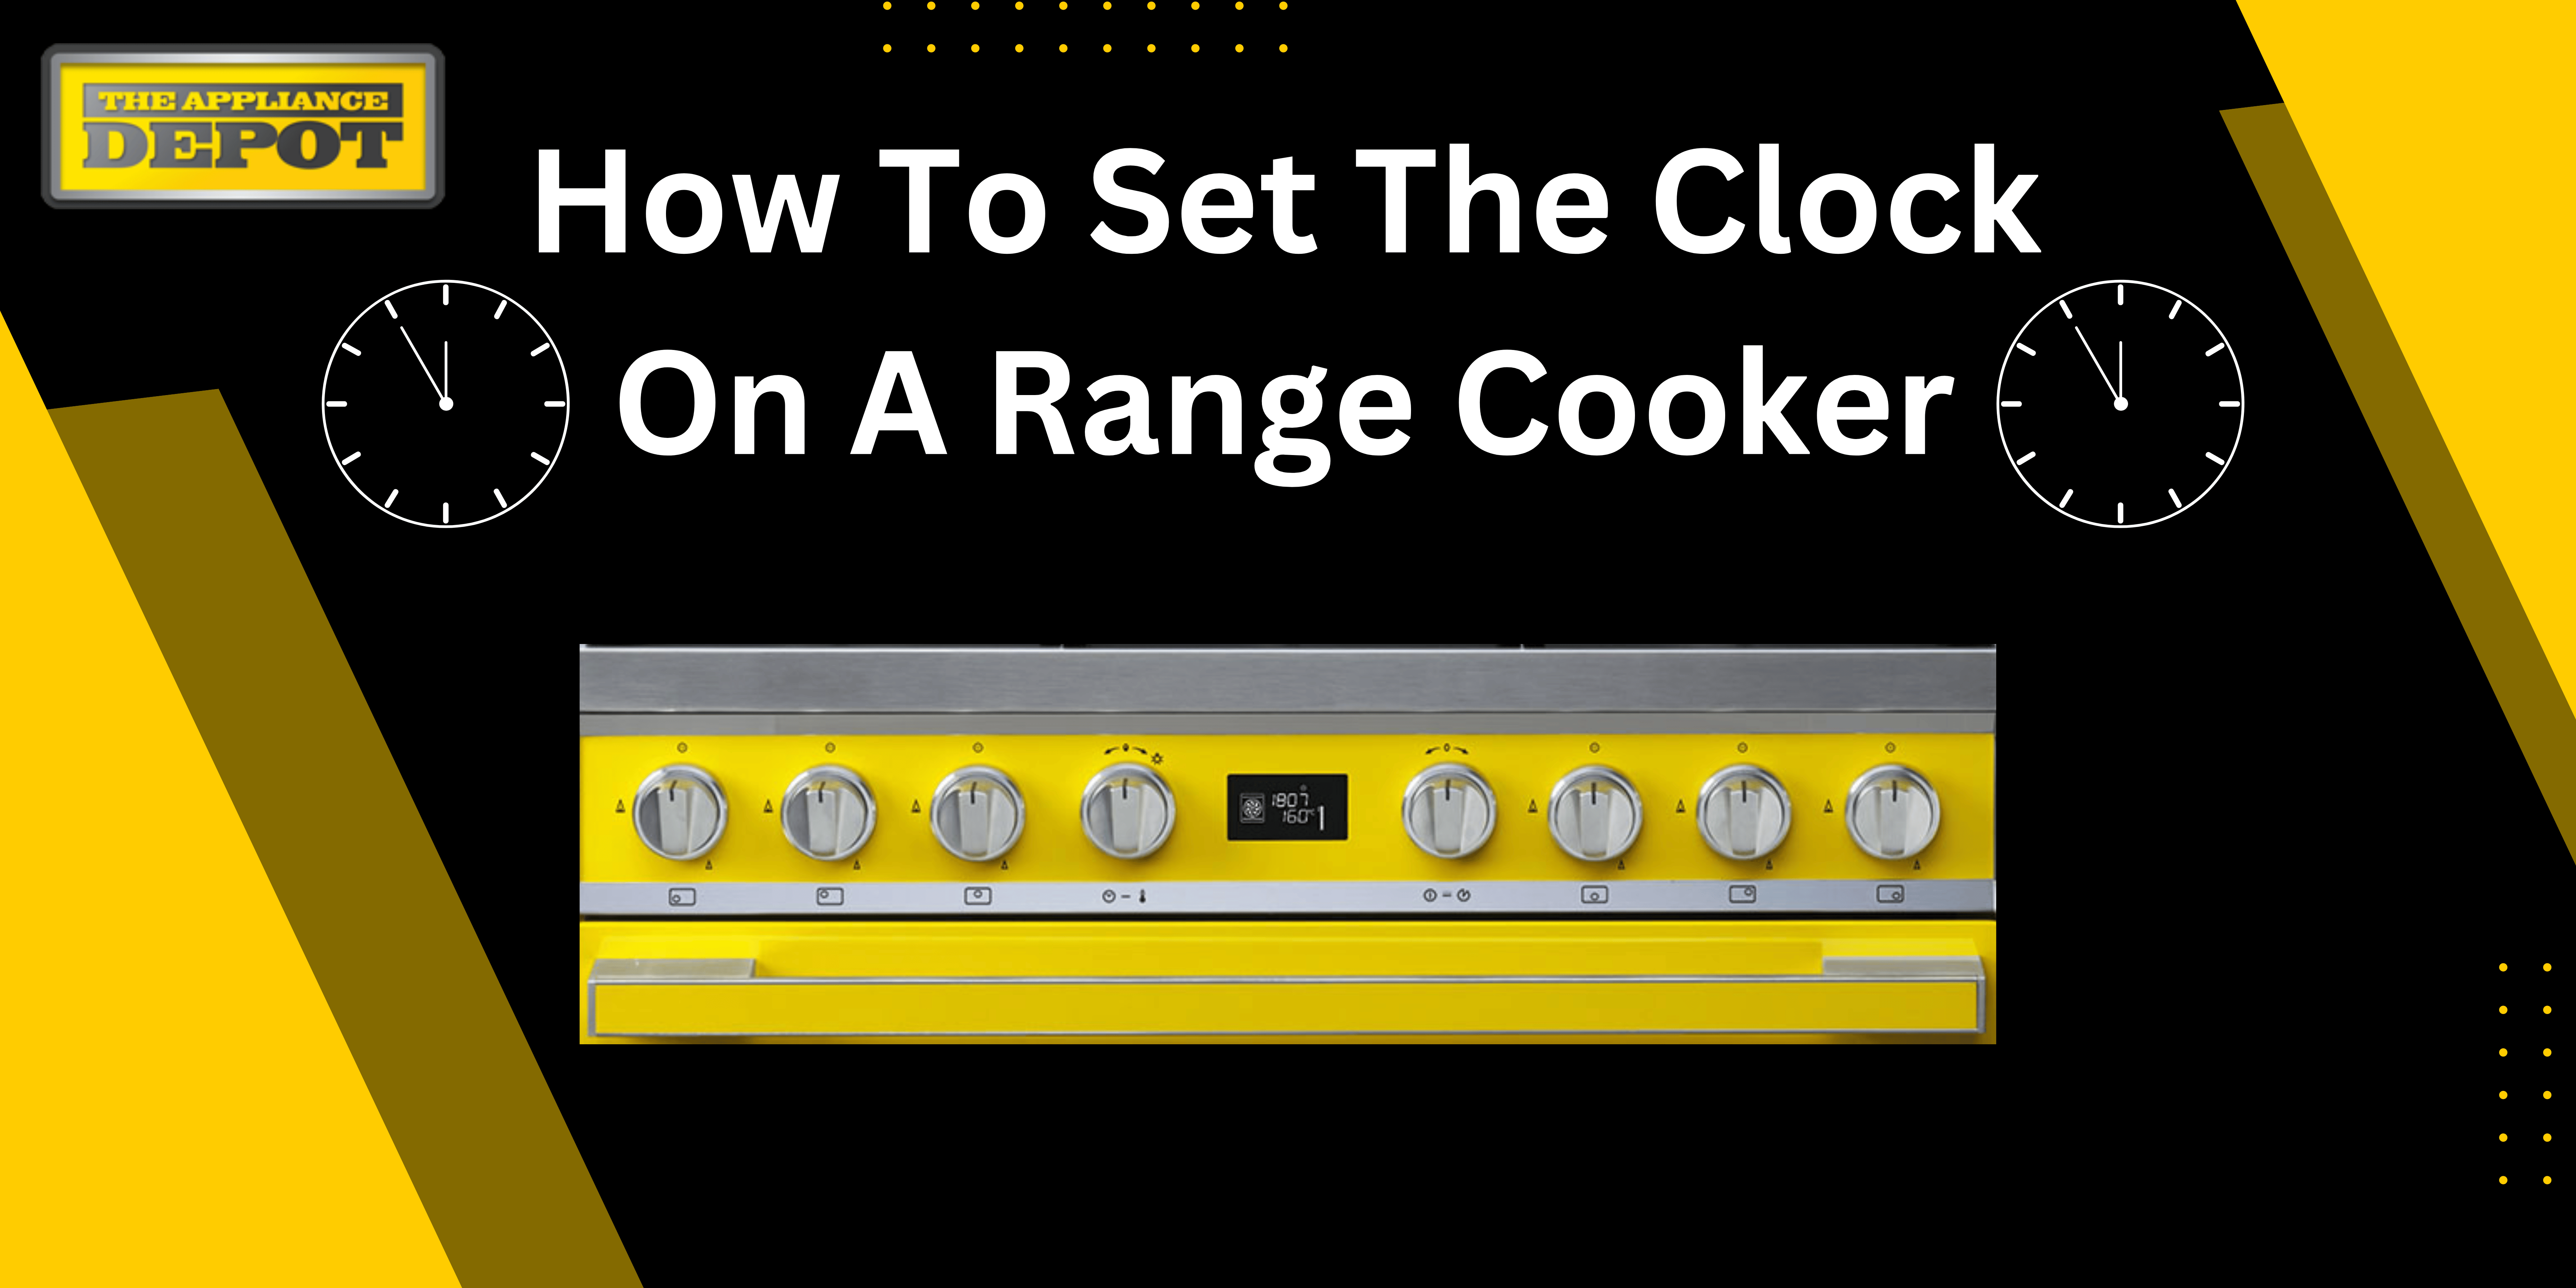 How To Set The Time On A Range Cooker